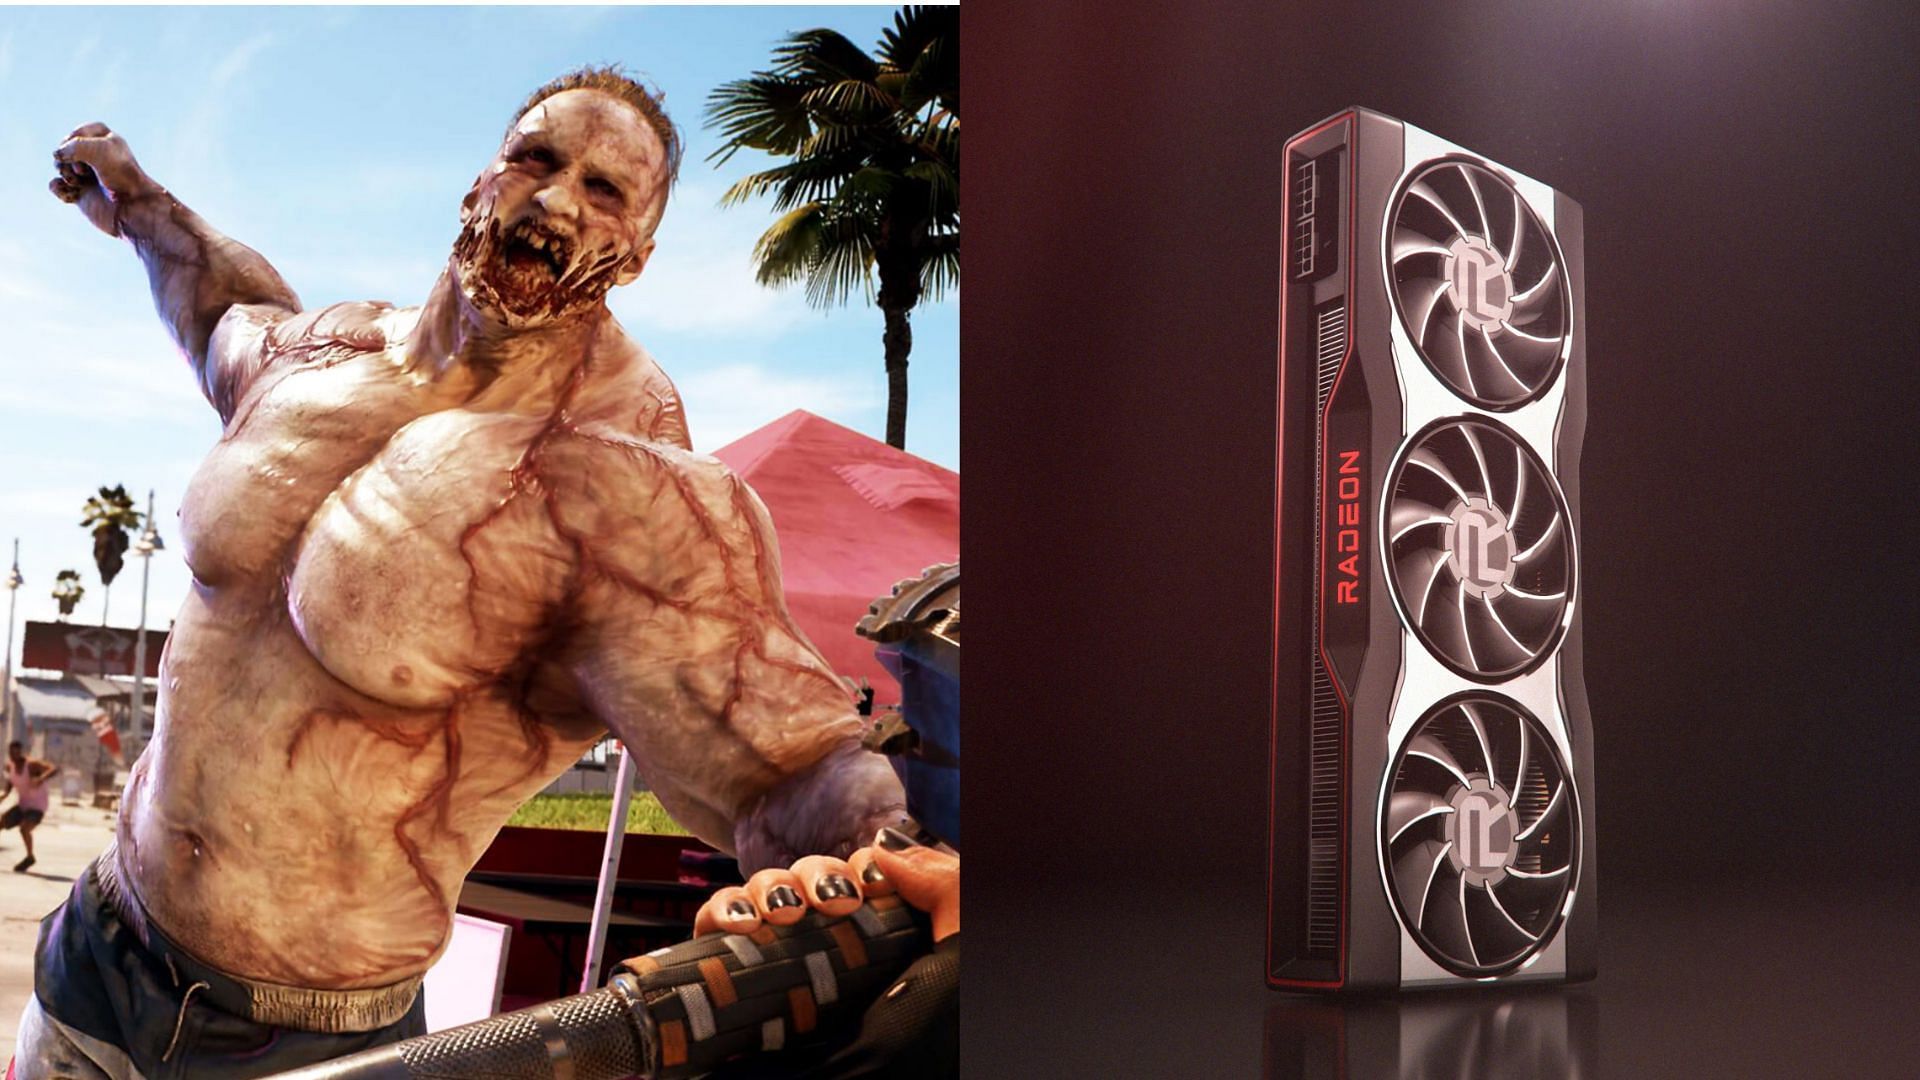 Dead Island 2 is being offered as part of the AMD 6000 series cards (Images via Steam, AMD)